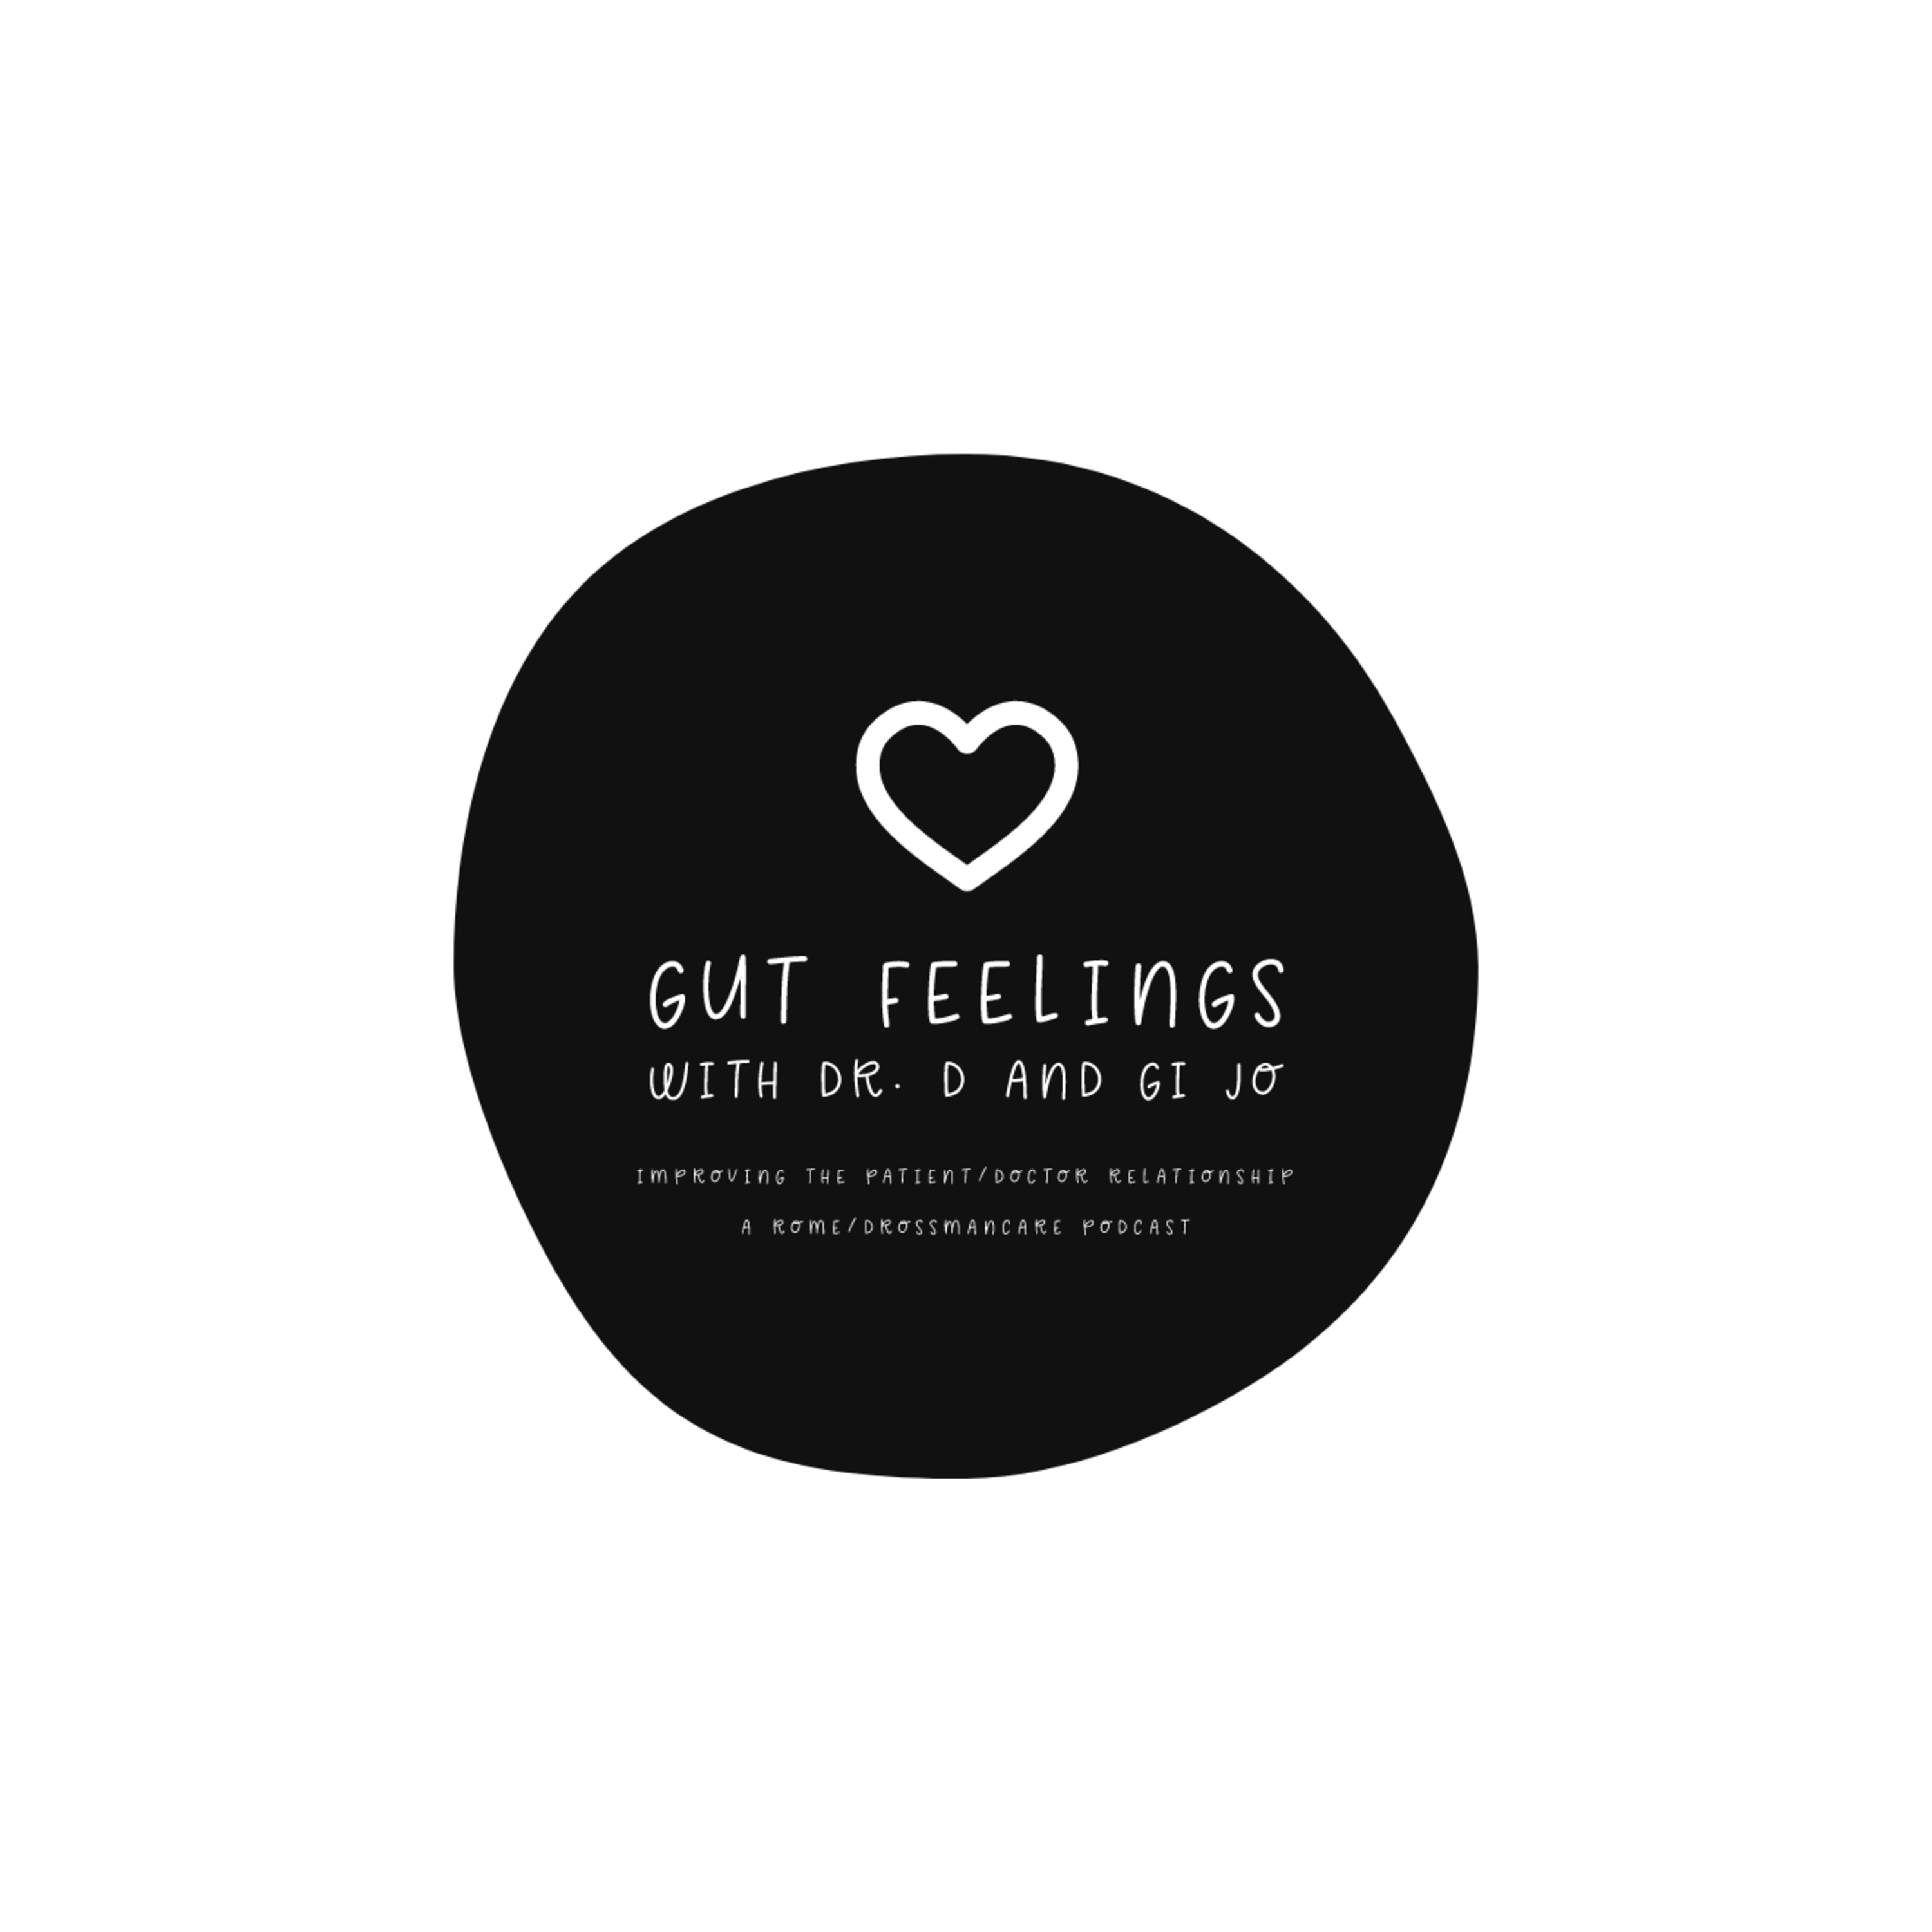 Show artwork for Gut Feelings: With Dr. D and GI Jo: A Rome Foundation/DrossmanCare Podcast Series